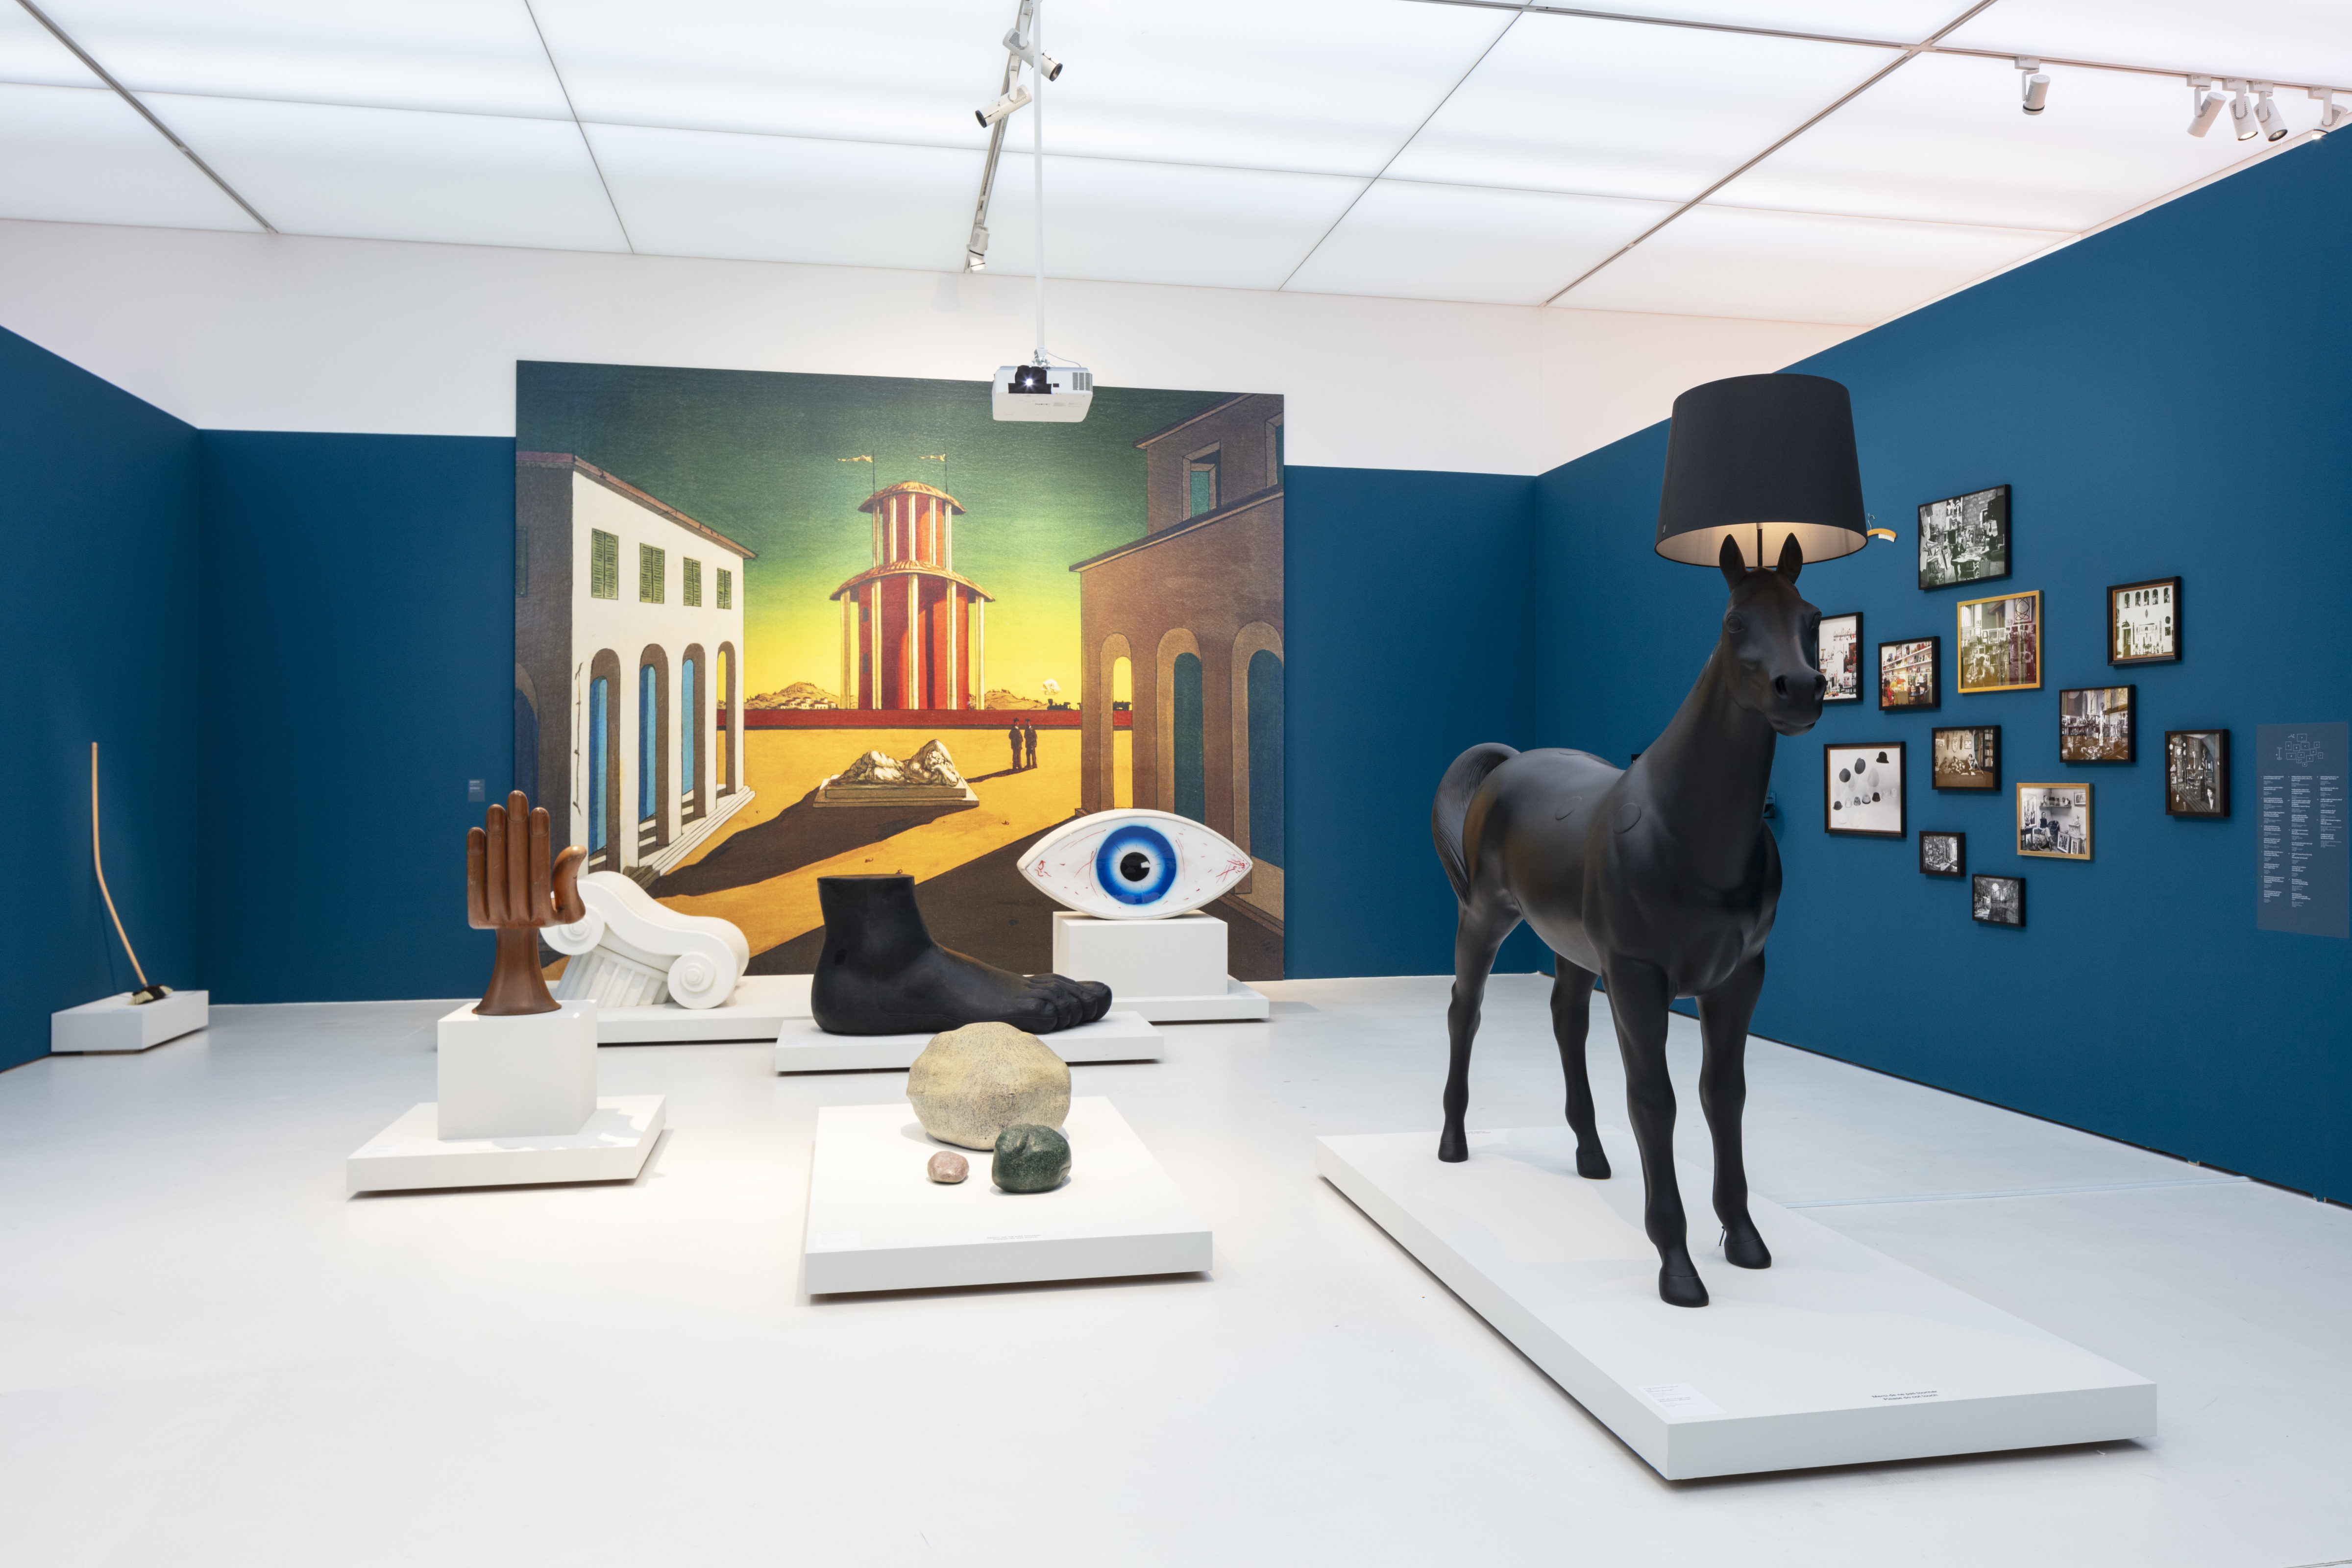 View of the exhibition "Surrealism. The Great Game", at the Lausanne Museum of Fine Arts (MCBA)